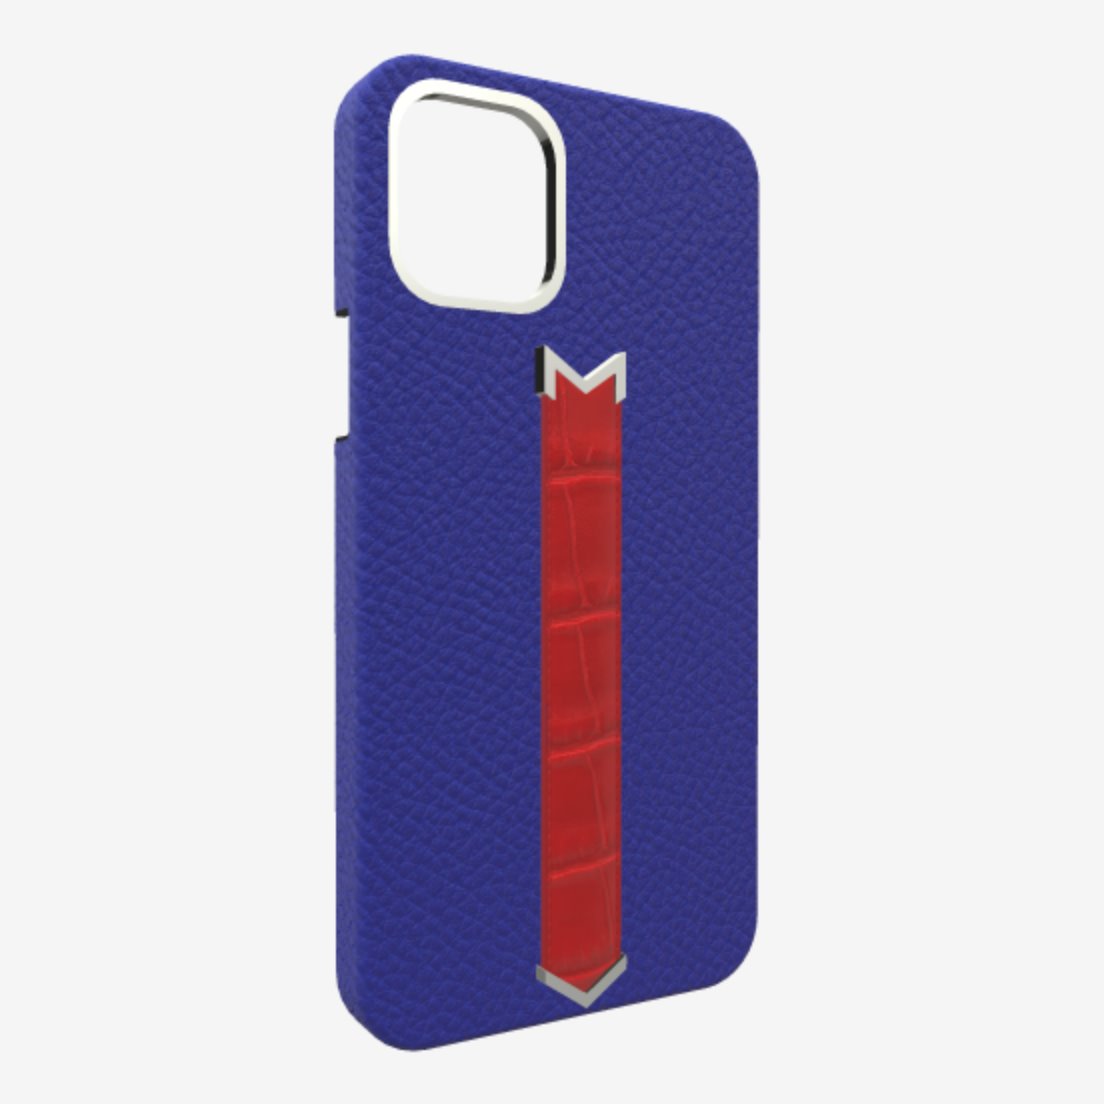 Silver Finger Strap Case for iPhone 13 Pro in Genuine Calfskin and Alligator Electric-Blue Glamour-Red 